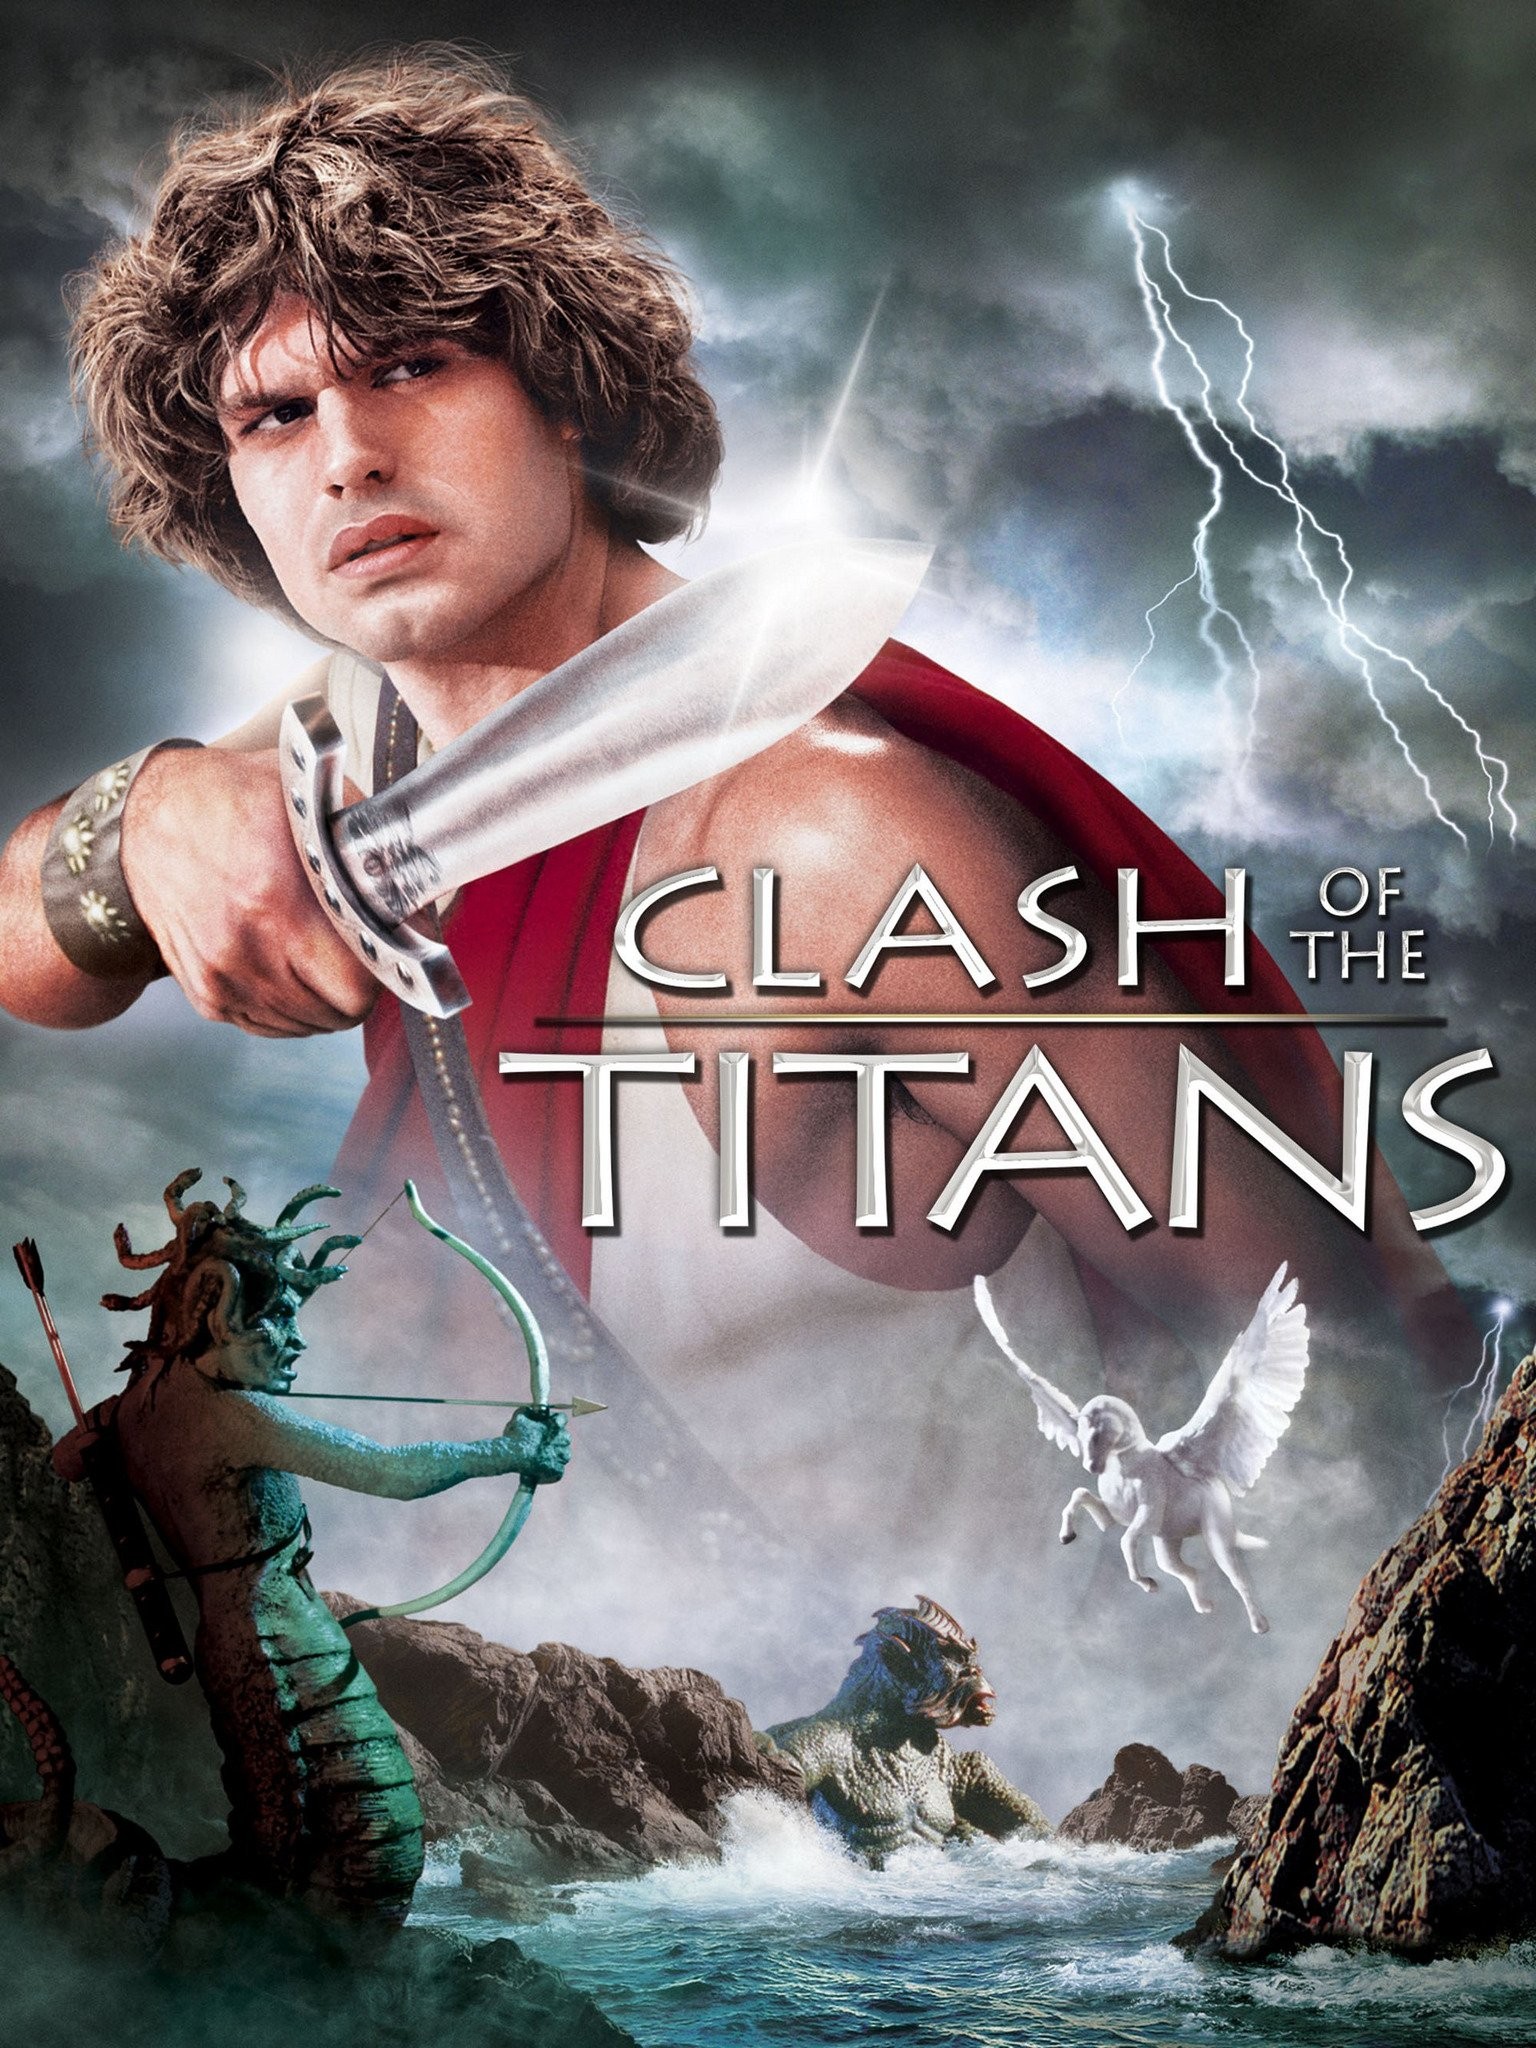 Clash Of The Titans Might Have Been A Good, Or At Least Better Movie